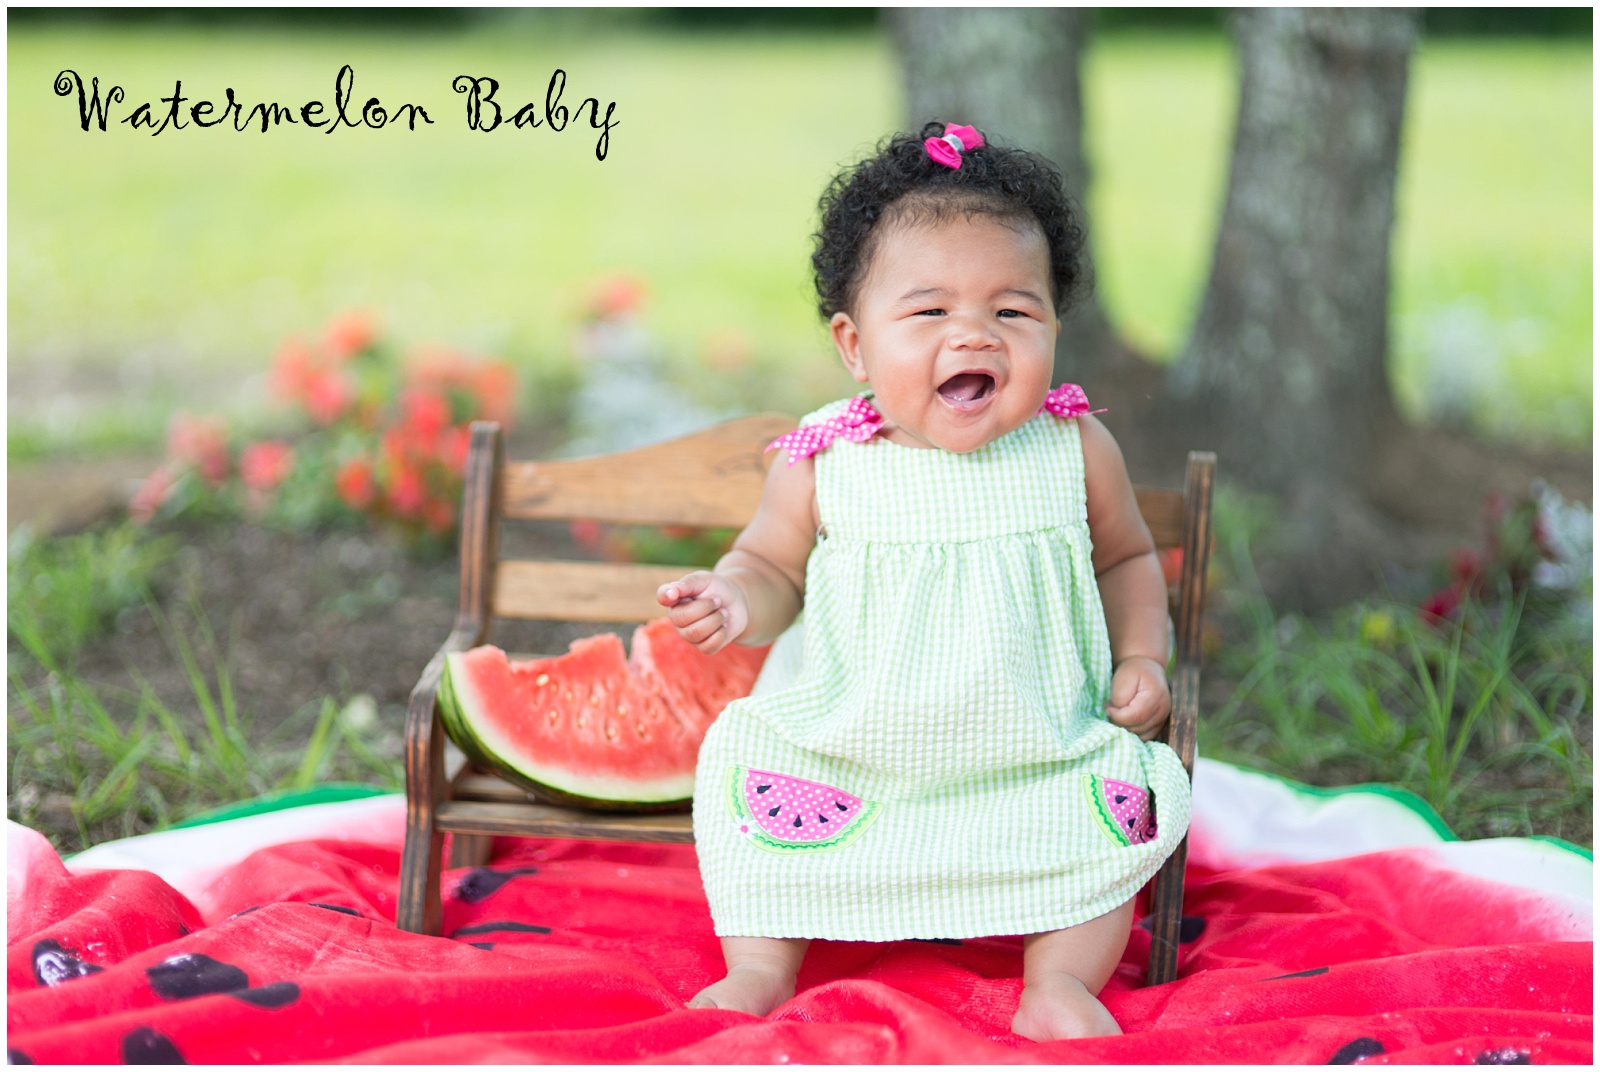 Just a few of our faves we took for Abi to be in our local Watermelon Festival Photo Contest.  She was already hot & tired when we did this, but she was such a champ!  How can ya not love her?!